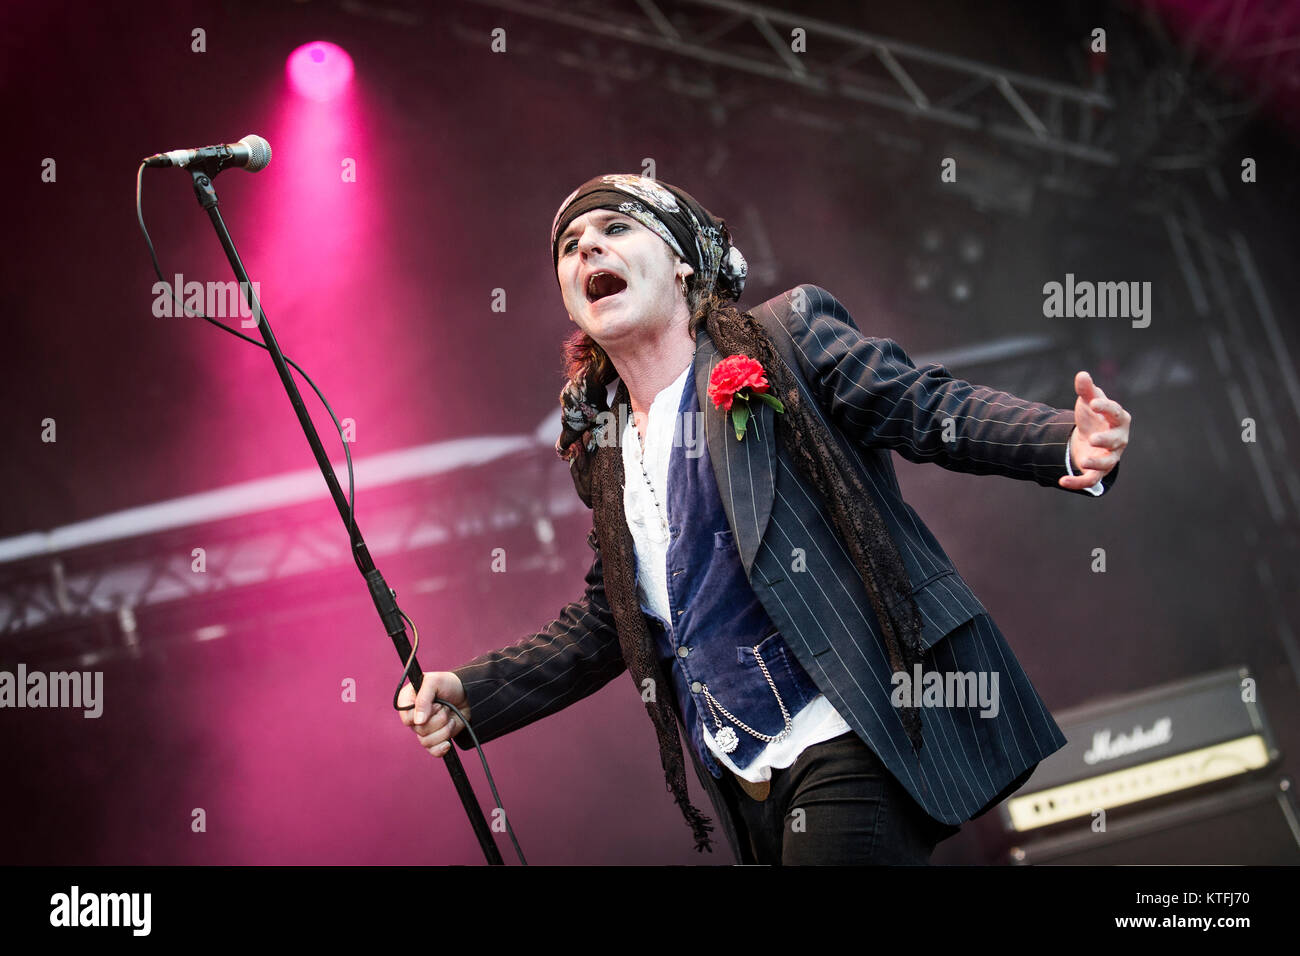 The English hard rock band The Quireboys performs a live at the Swedish music festival Sweden Rock Festival 2015. Here vocalist Spike is seen live on stage. Sweden, 03/06 2015. Stock Photo